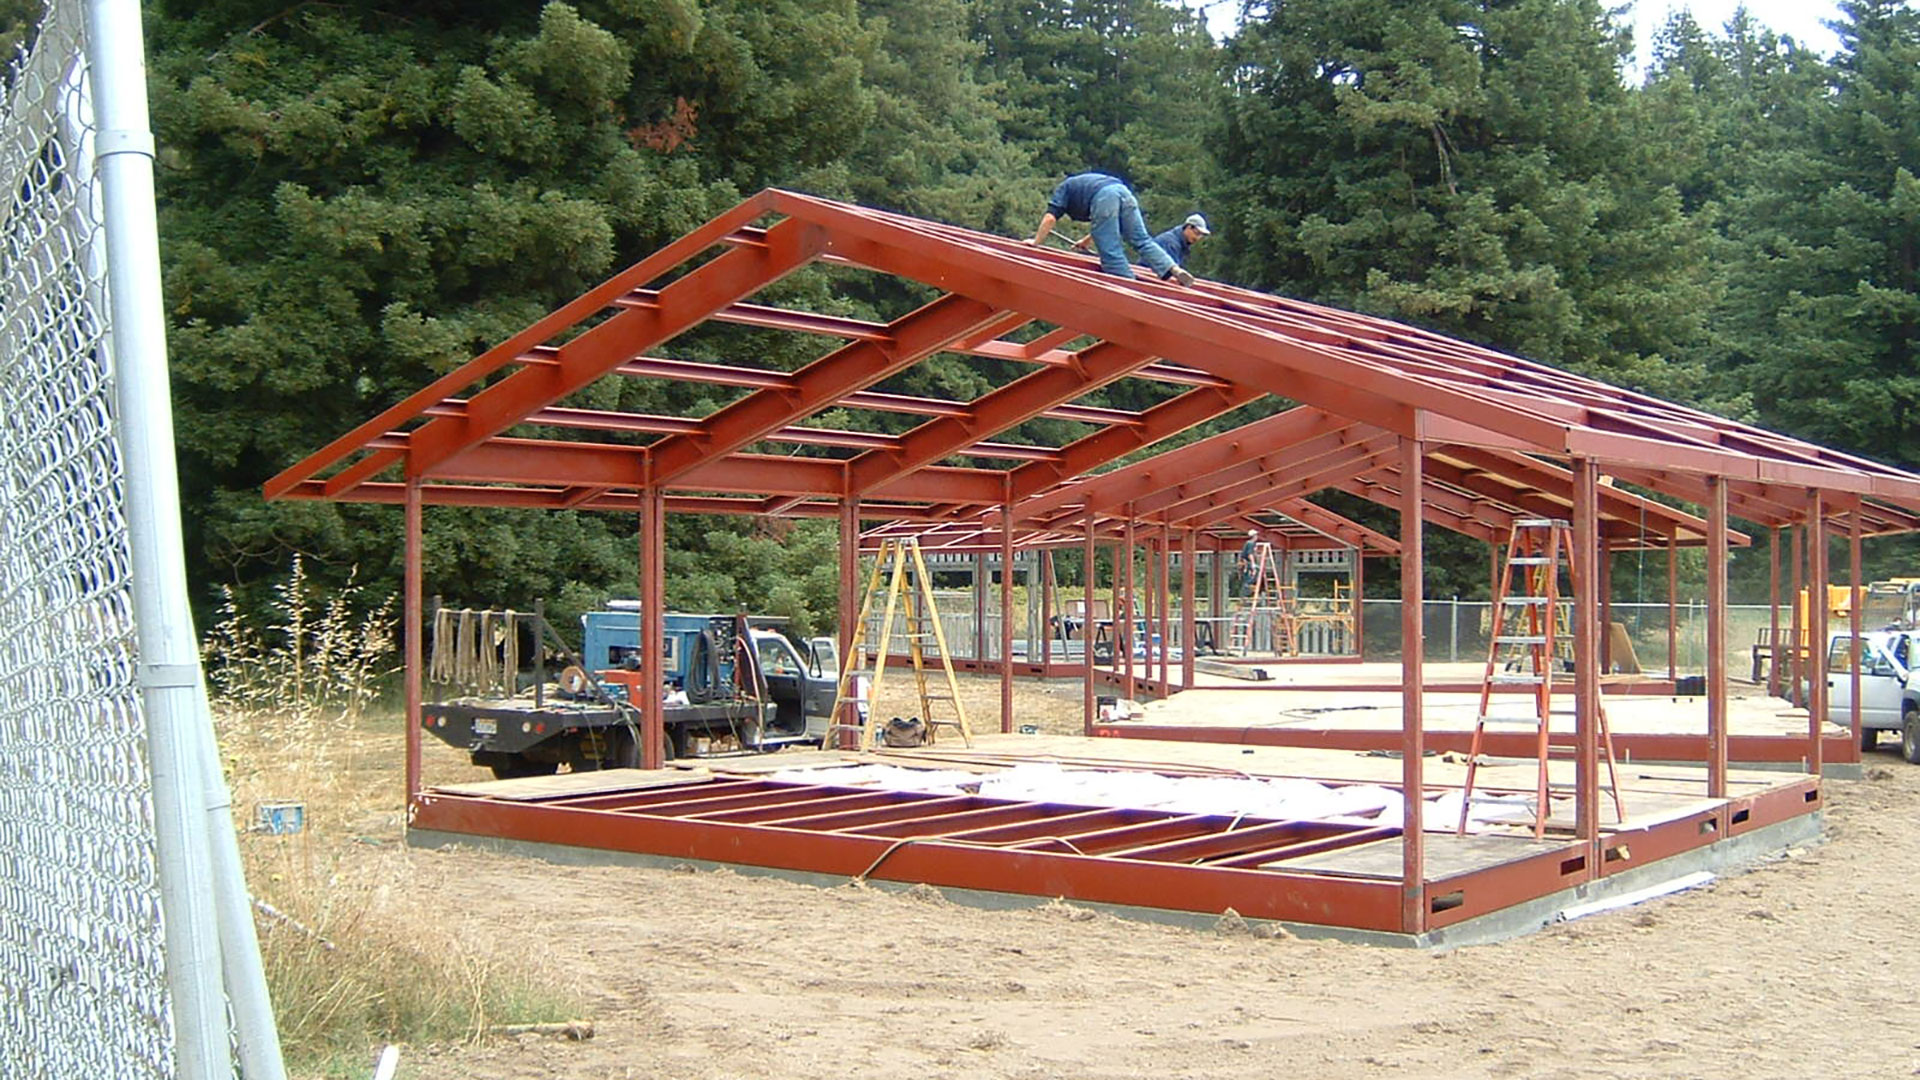 Exposed red metal frame during construction of several buildings side-by-side.